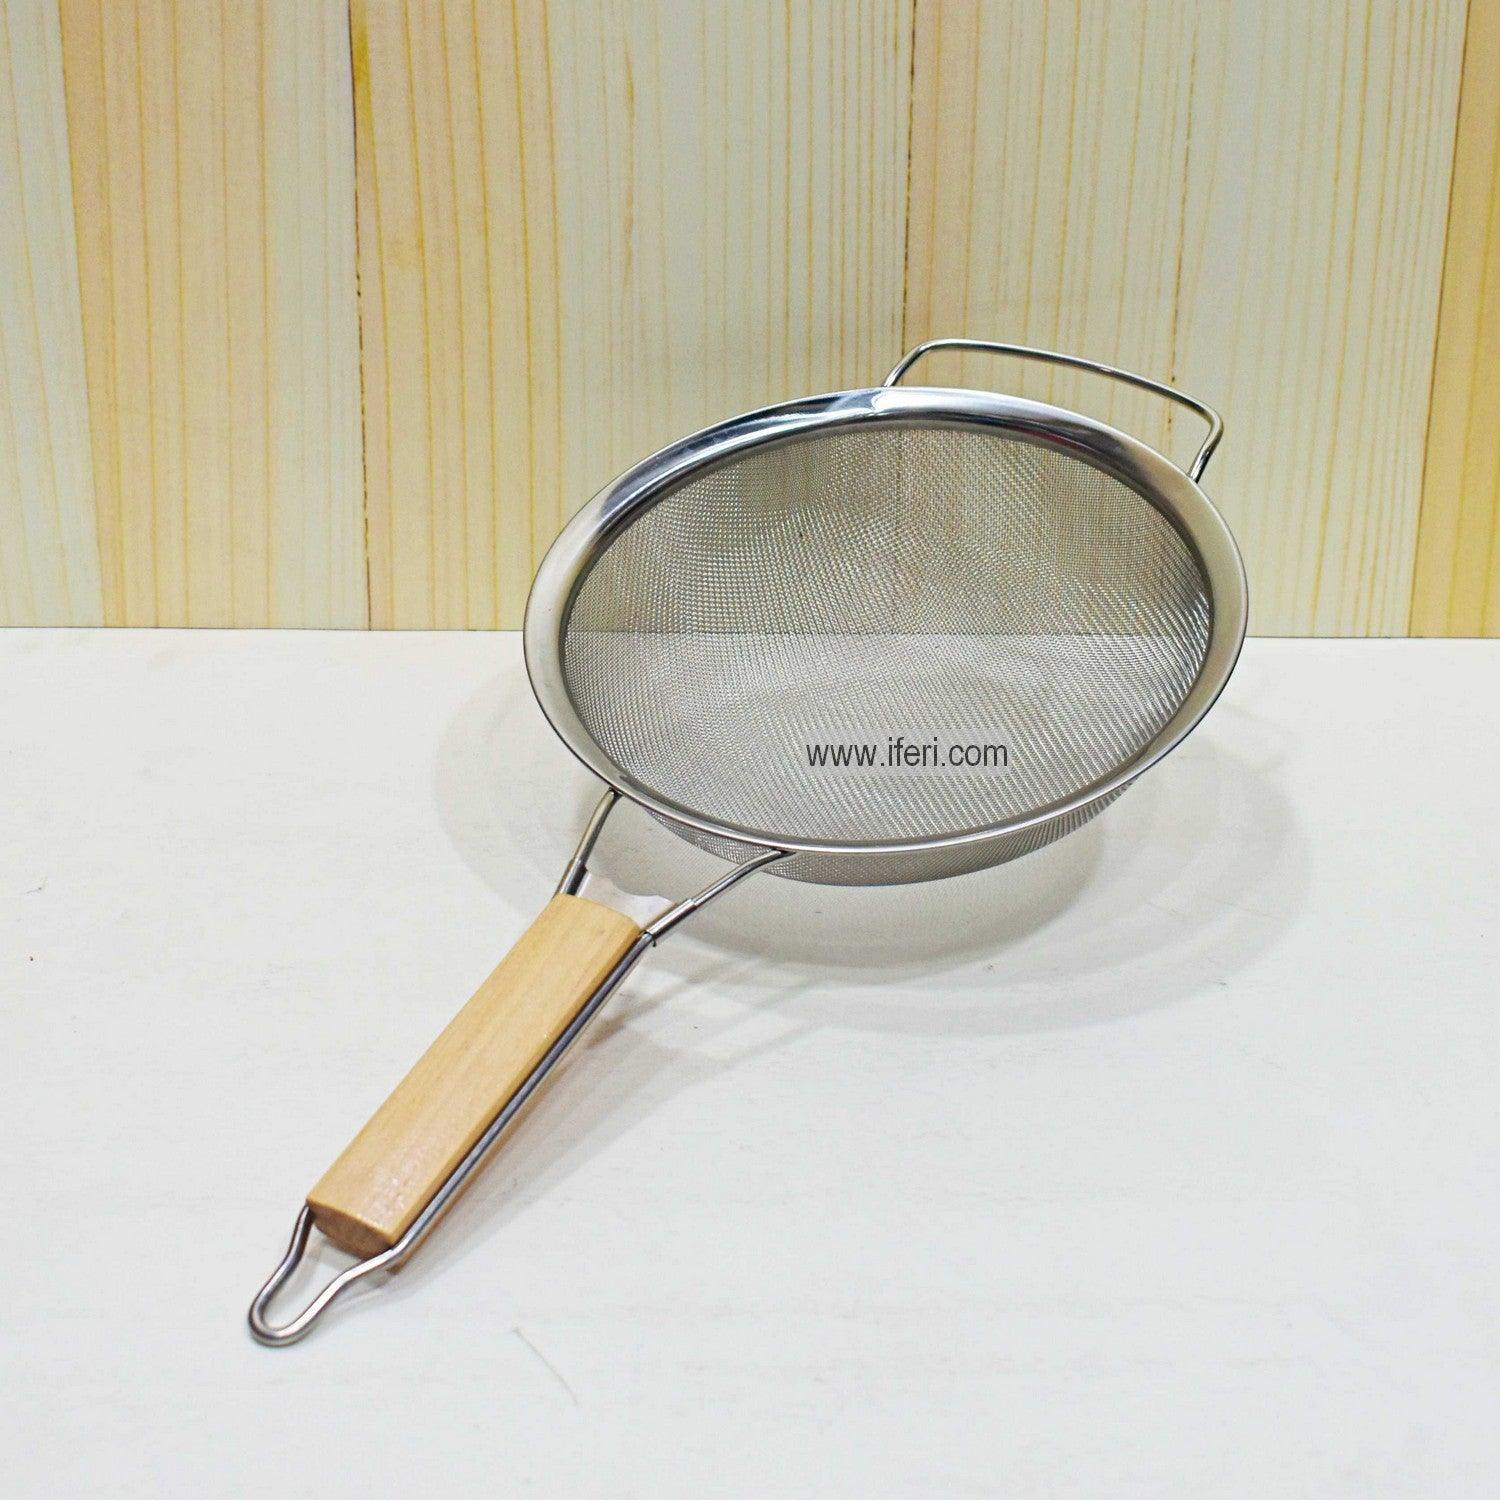 17 inch Stainless Steel Skimmer Spoon Colander Strainer for Cooking and Frying SN0696 Price in Bangladesh - iferi.com